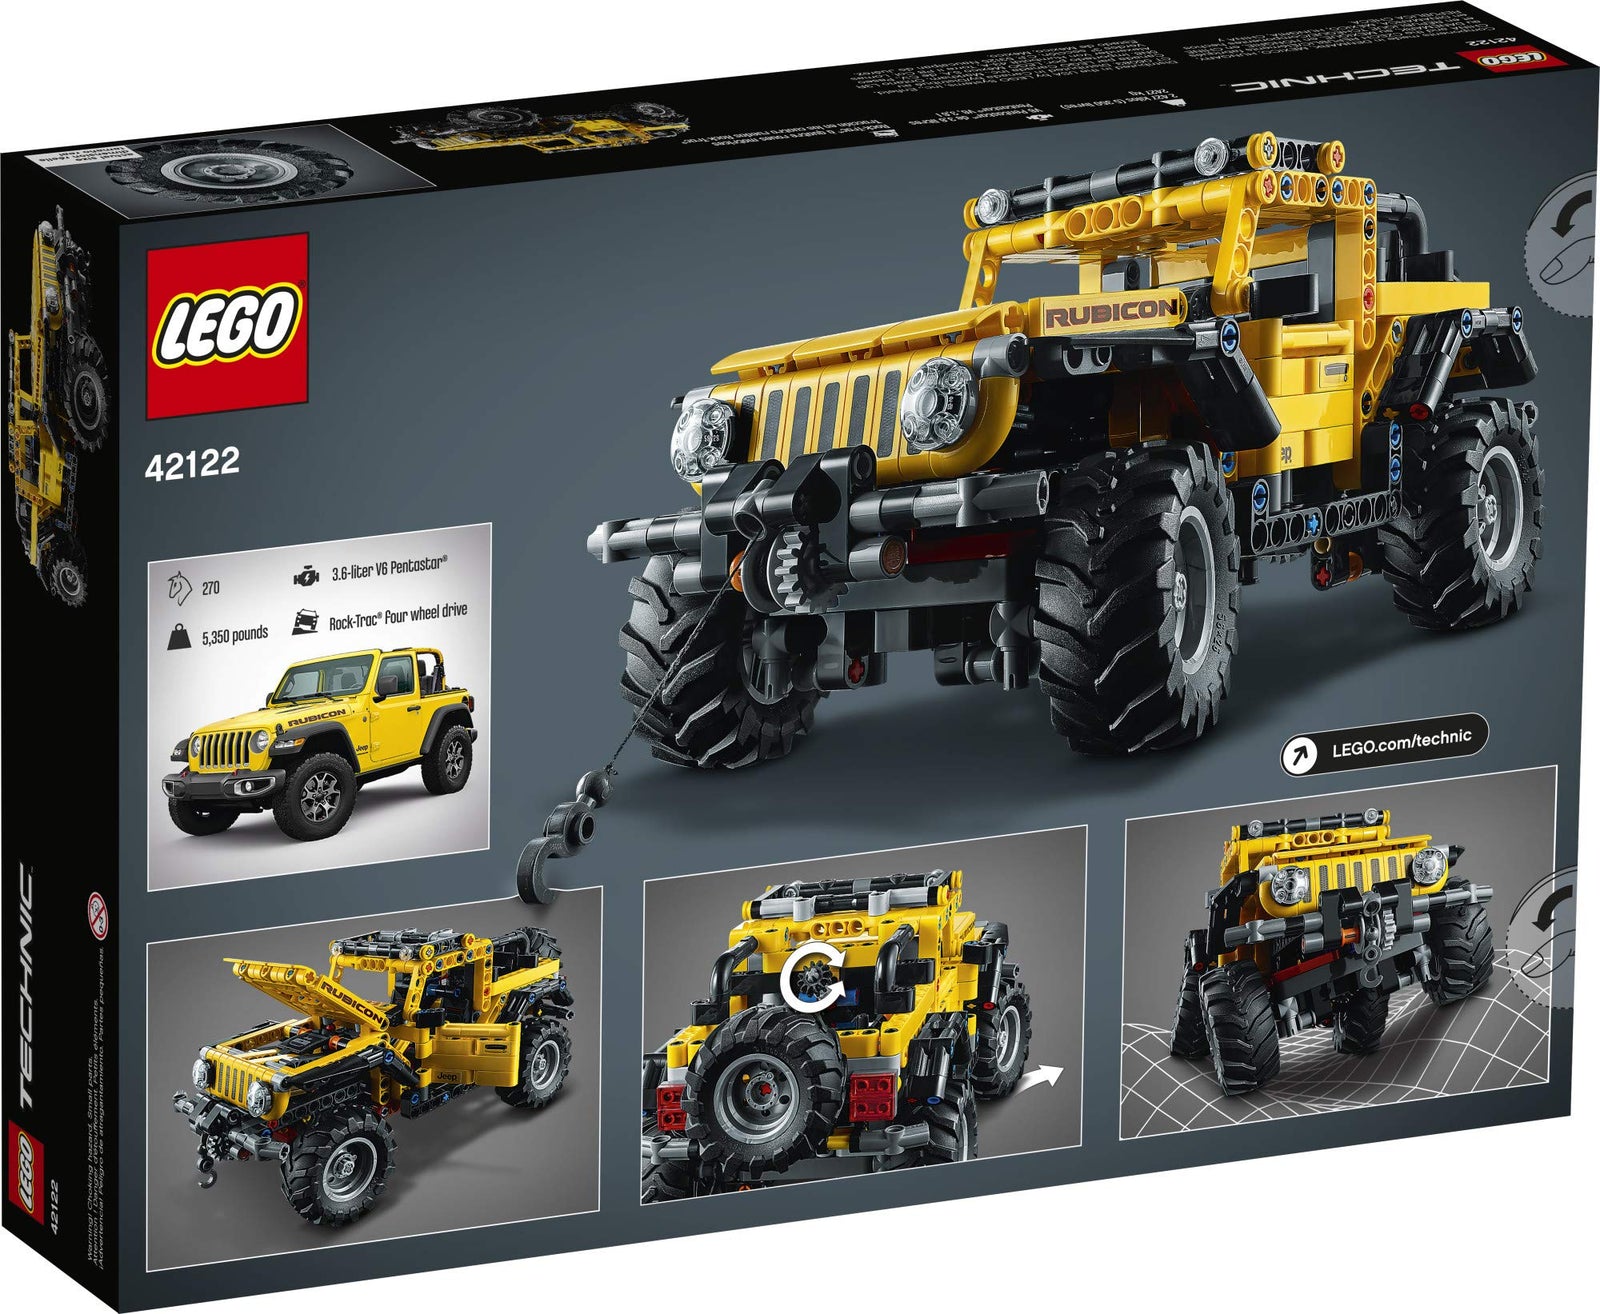 LEGO Technic Jeep Wrangler 42122; an Engaging Model Building Kit for Kids Who Love High-Performance Toy Vehicles, New 2021 (665 Pieces)